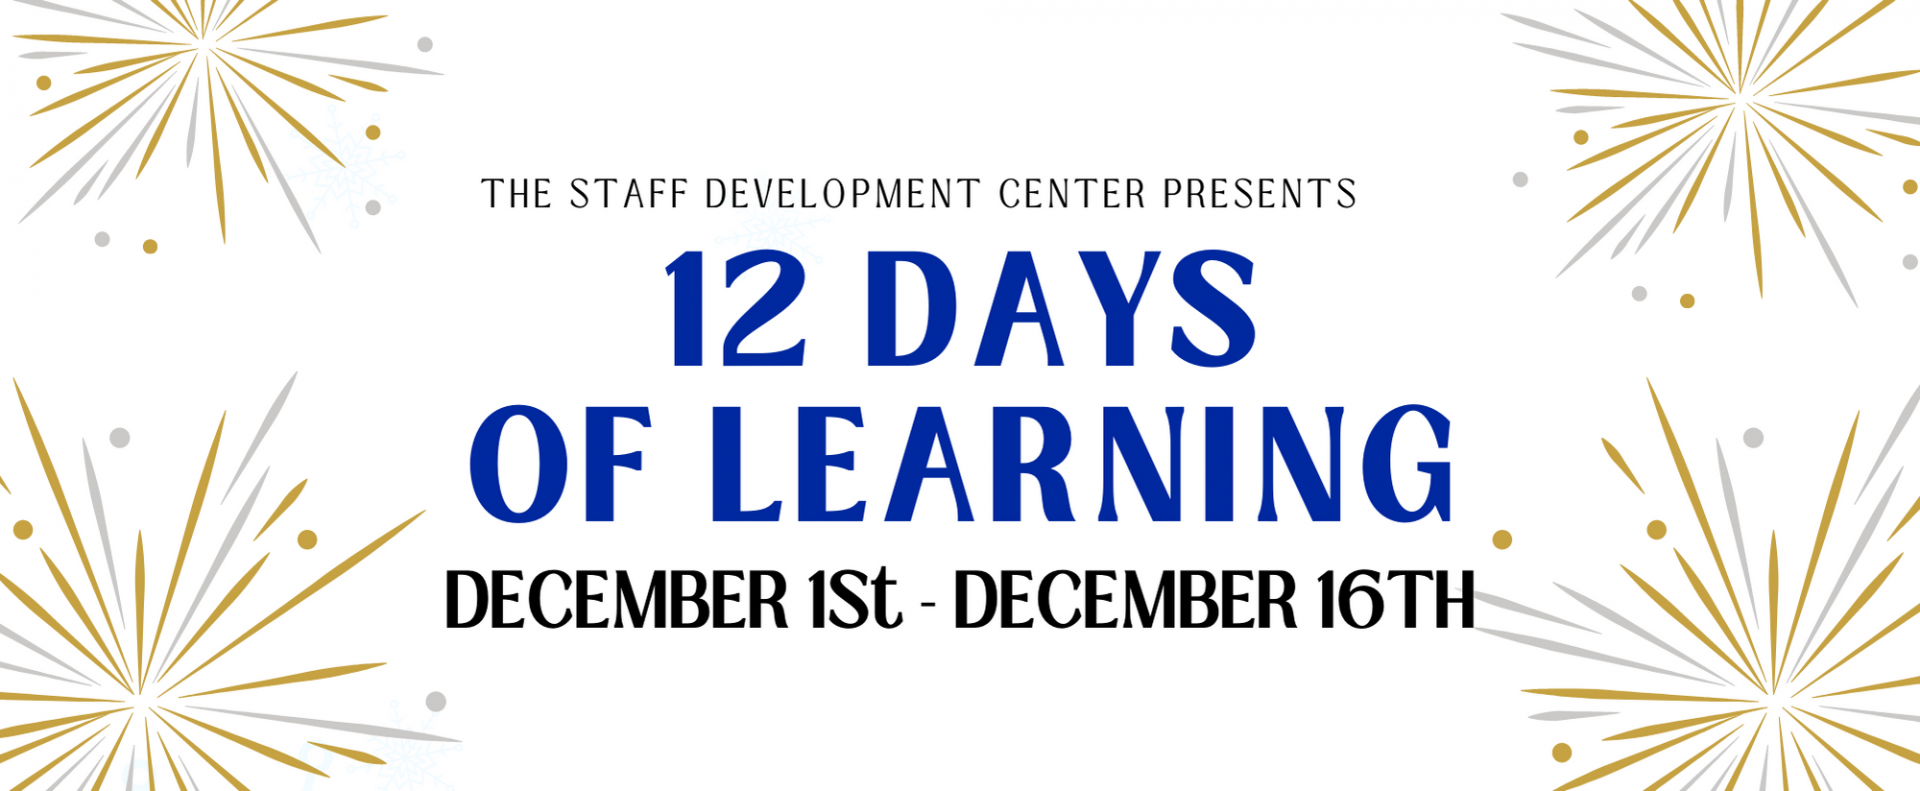 The Staff Development Center presents: 12 Days of Learning